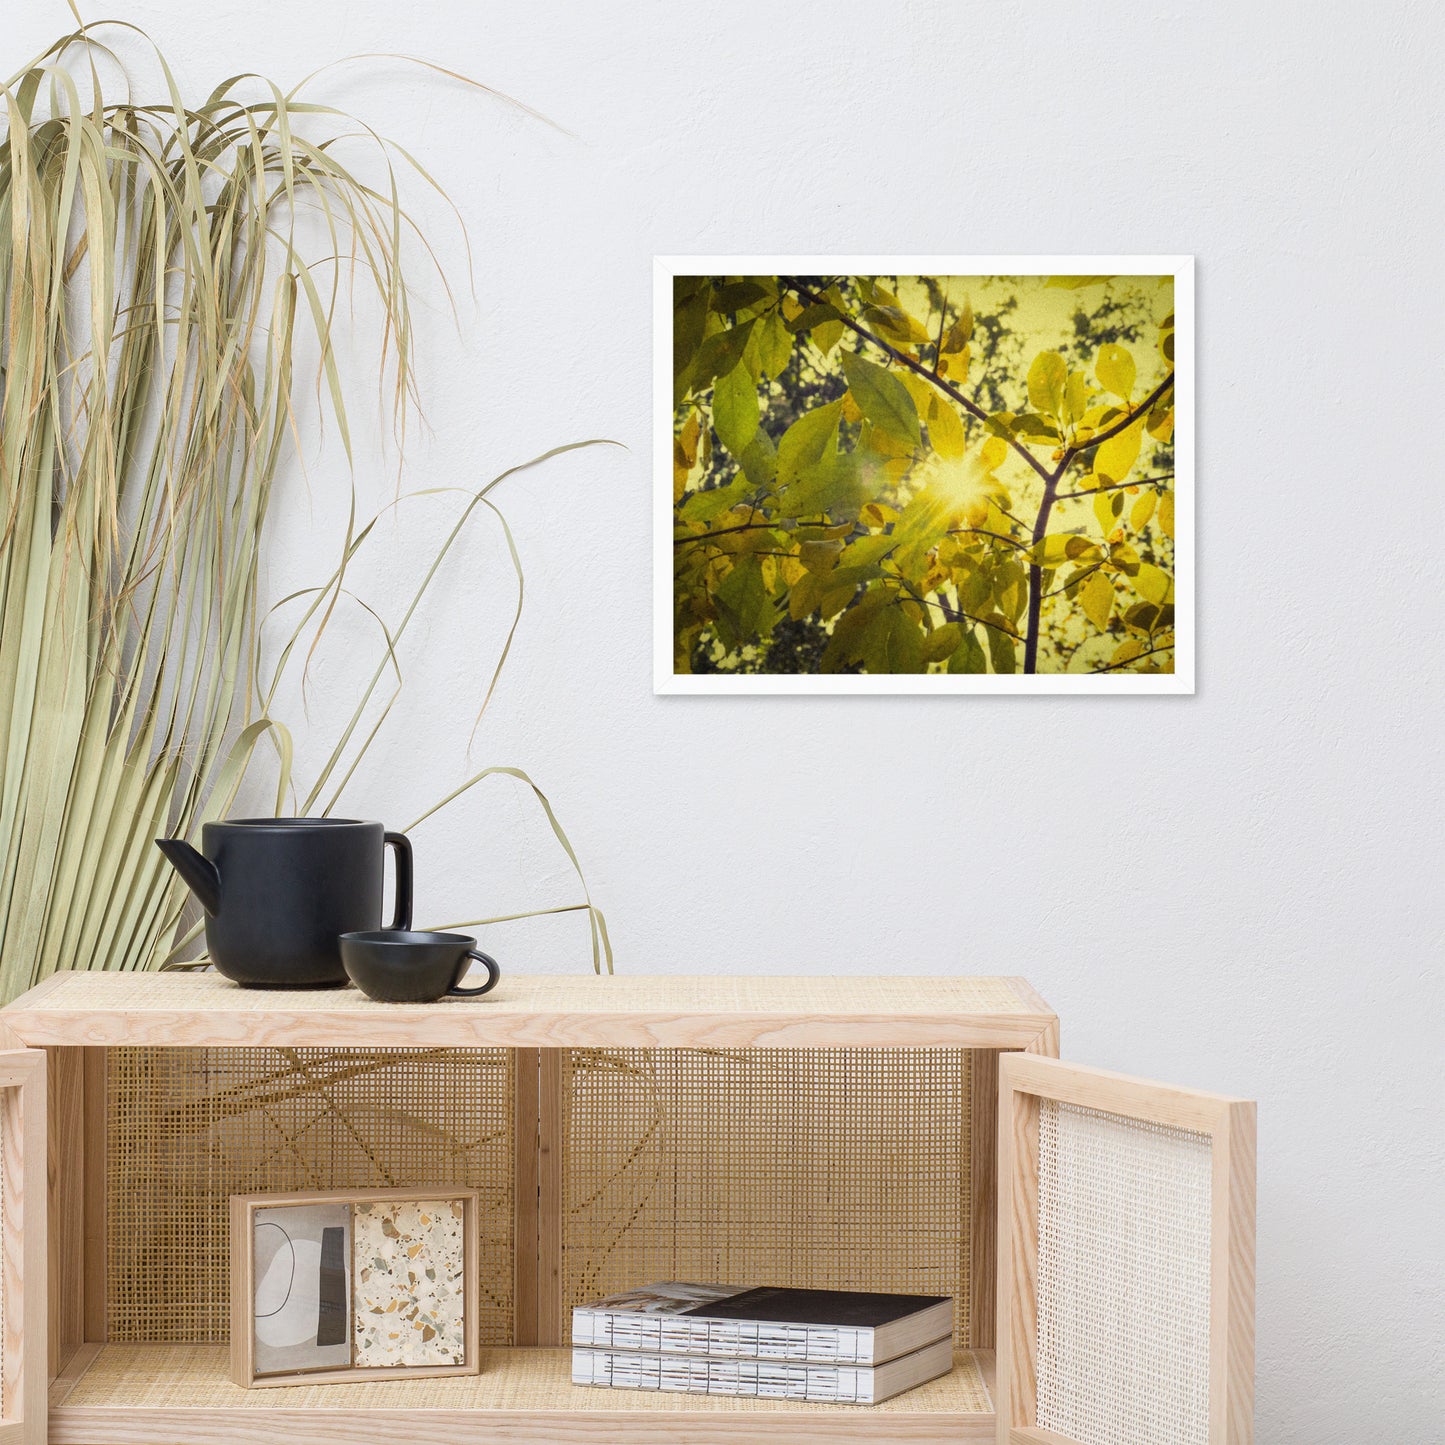 Framed Prints For Hallways: Aged Golden Leaves Abstract / Country Farmhouse Style / Botanical / Nature Photo Framed Wall Art Print - Artwork - Home Decor